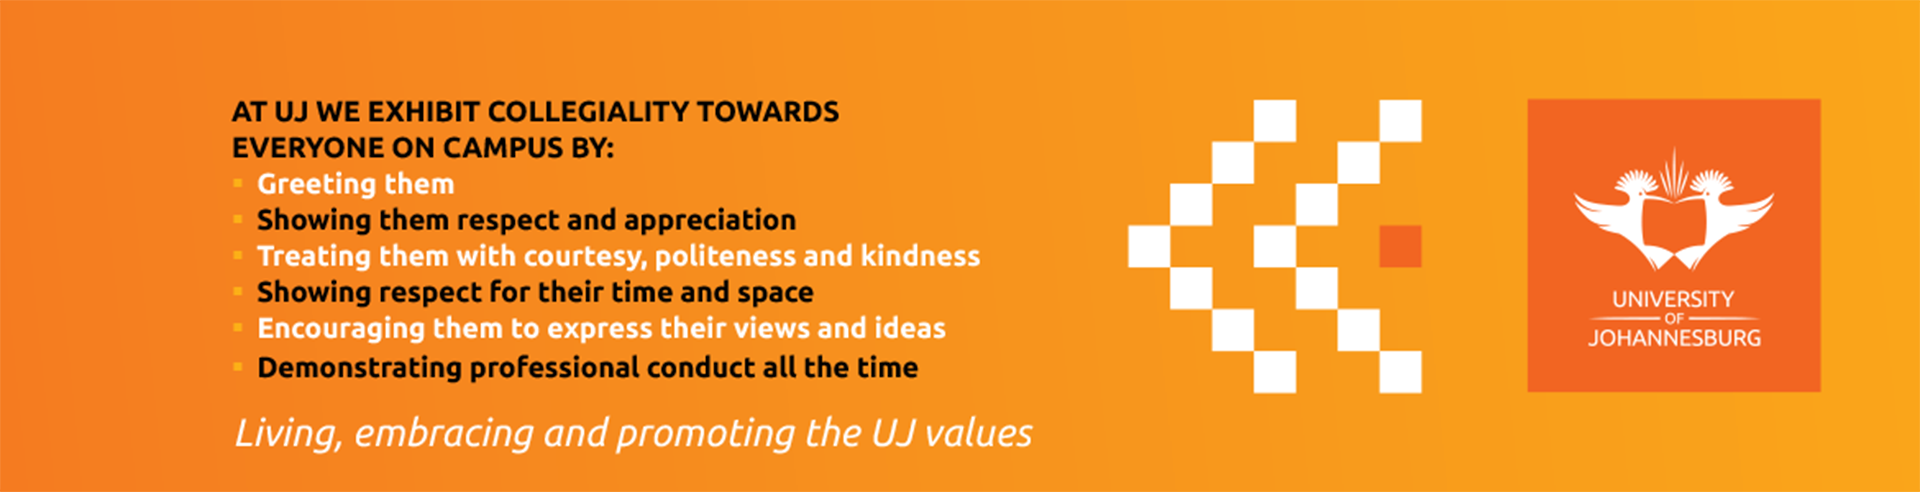 Uj Values Expressions Posters 2020 Ulink 1170x300mm 41